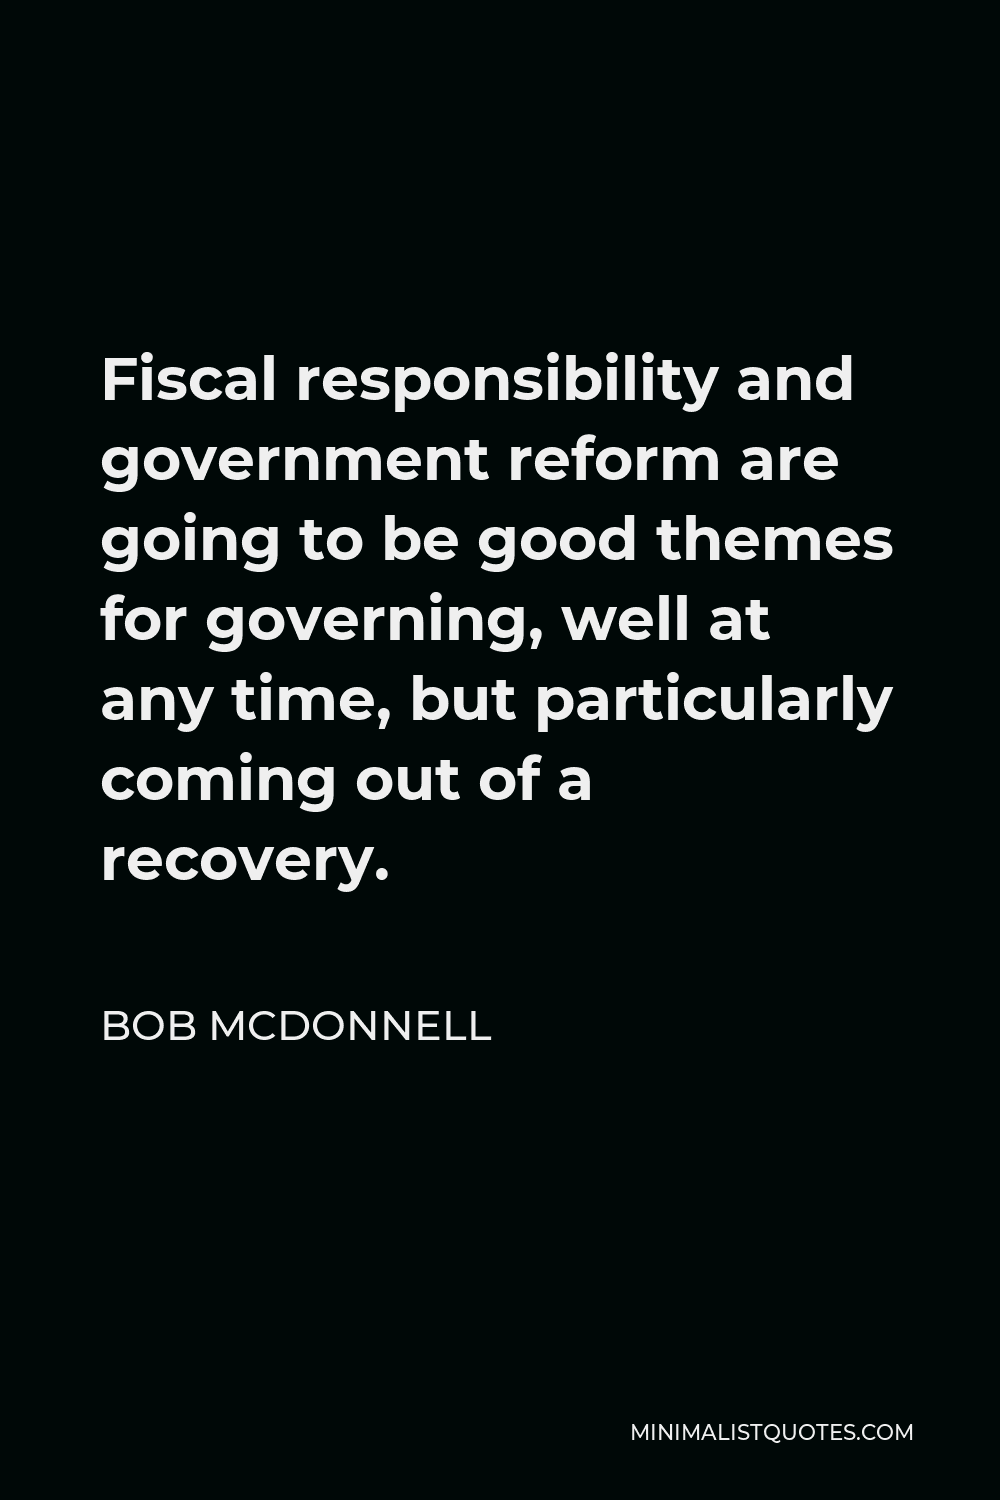 Bob McDonnell Quote - Fiscal responsibility and government reform are going to be good themes for governing, well at any time, but particularly coming out of a recovery.